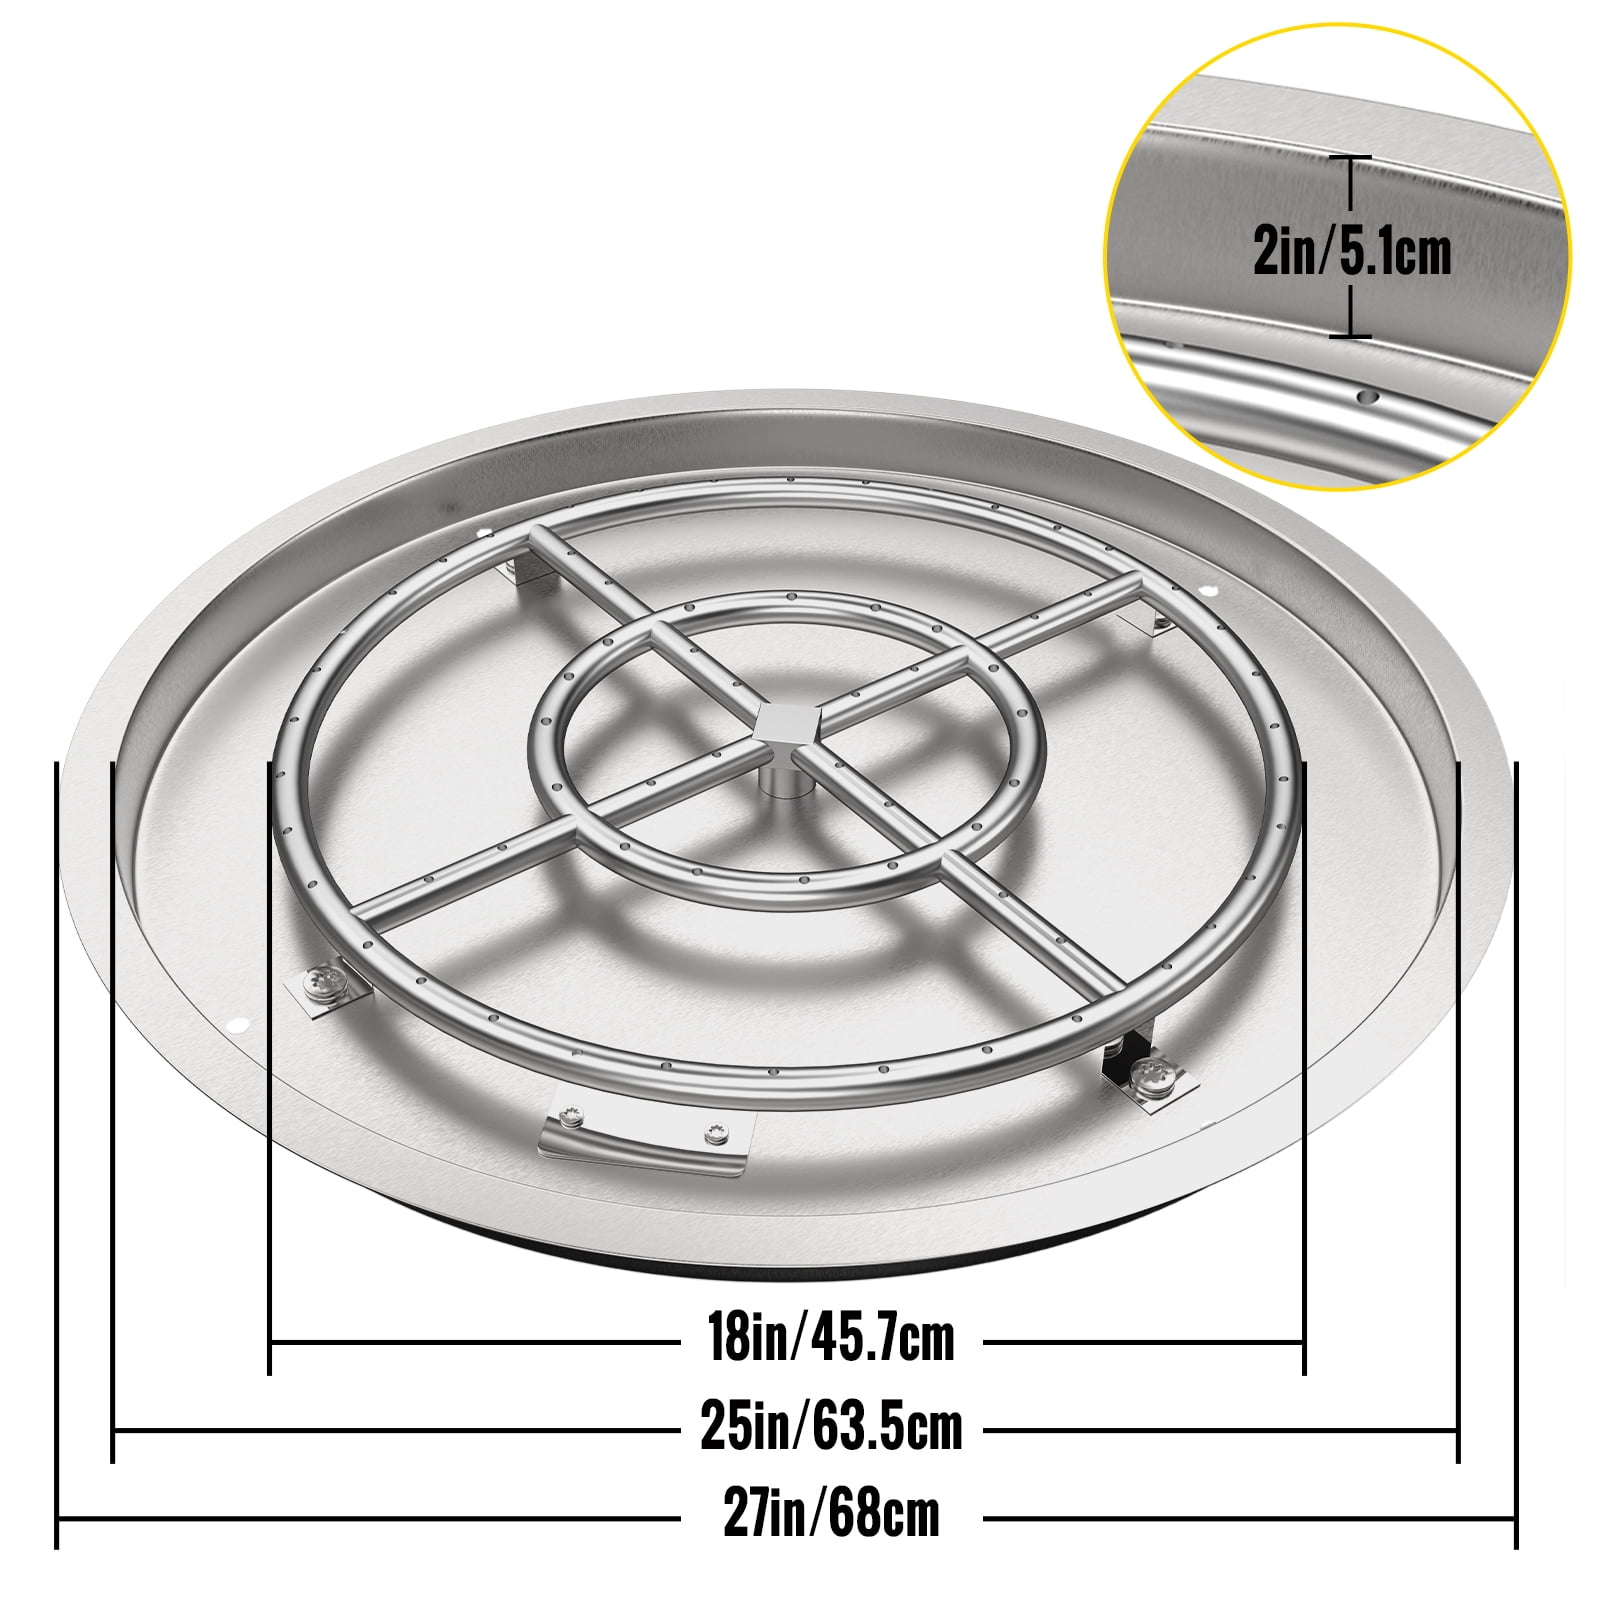 Stanbroil Stainless Steel Natural Gas Fireplace Dual Flame Pan Burner Kit 14.5-inch 